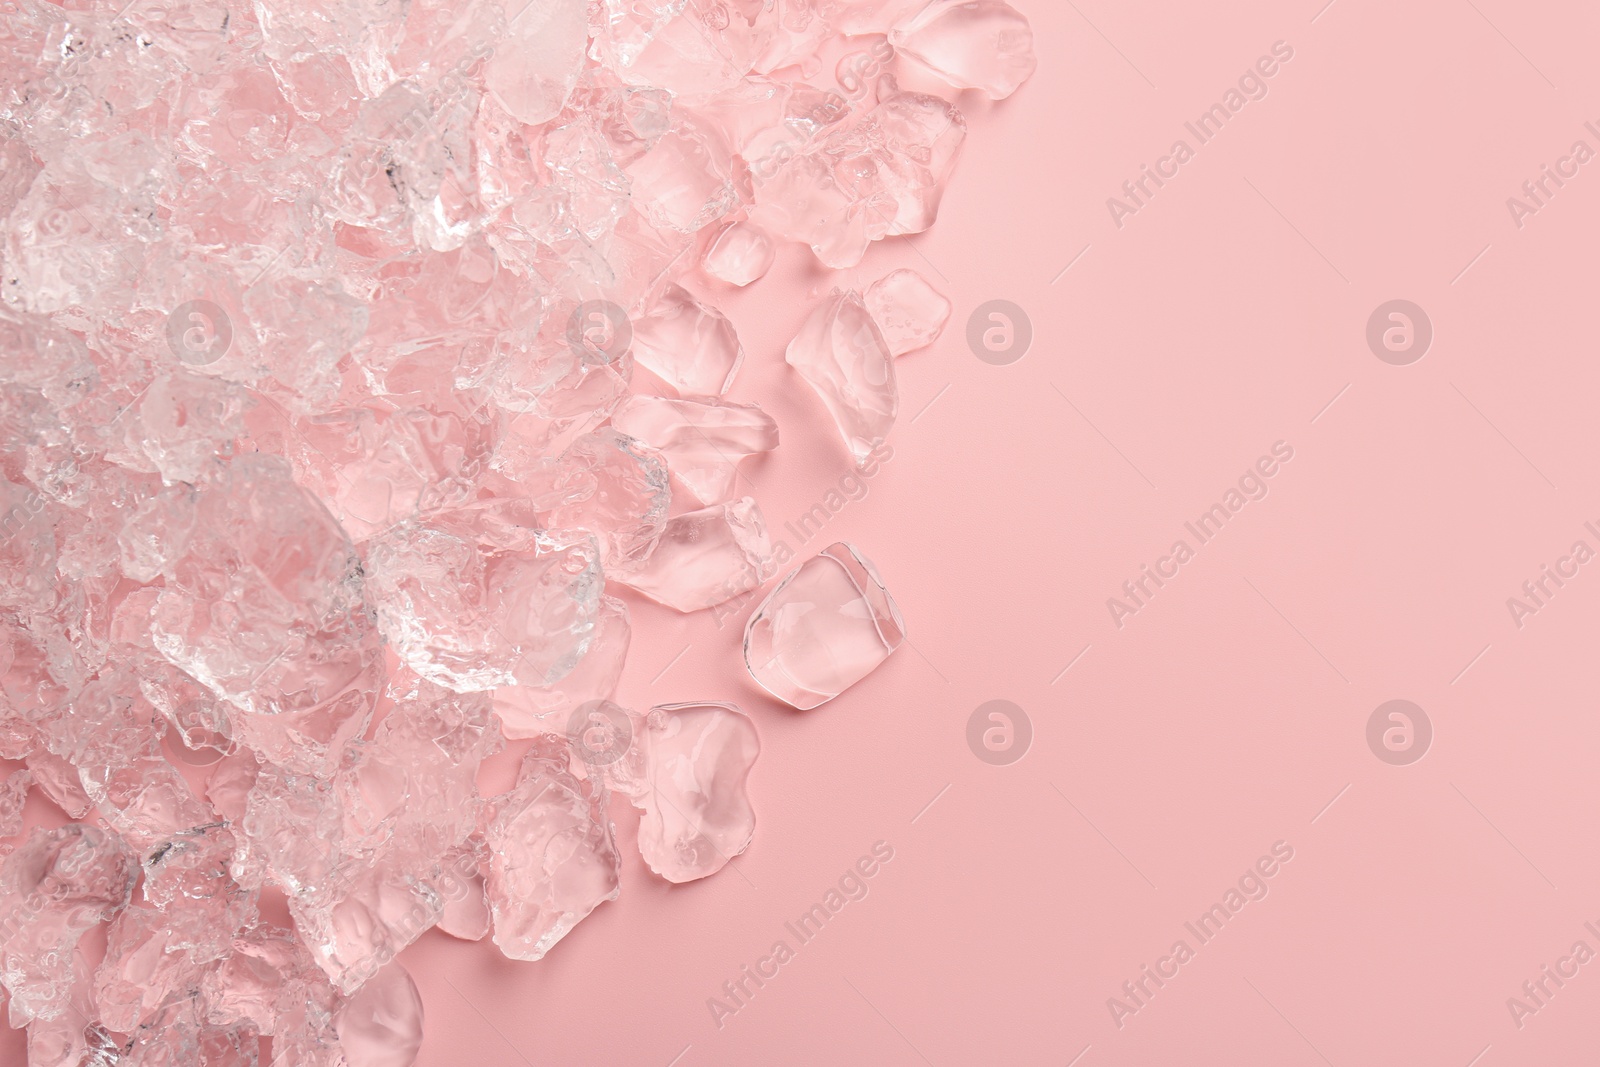 Photo of Pieces of crushed ice on pink background, top view. Space for text